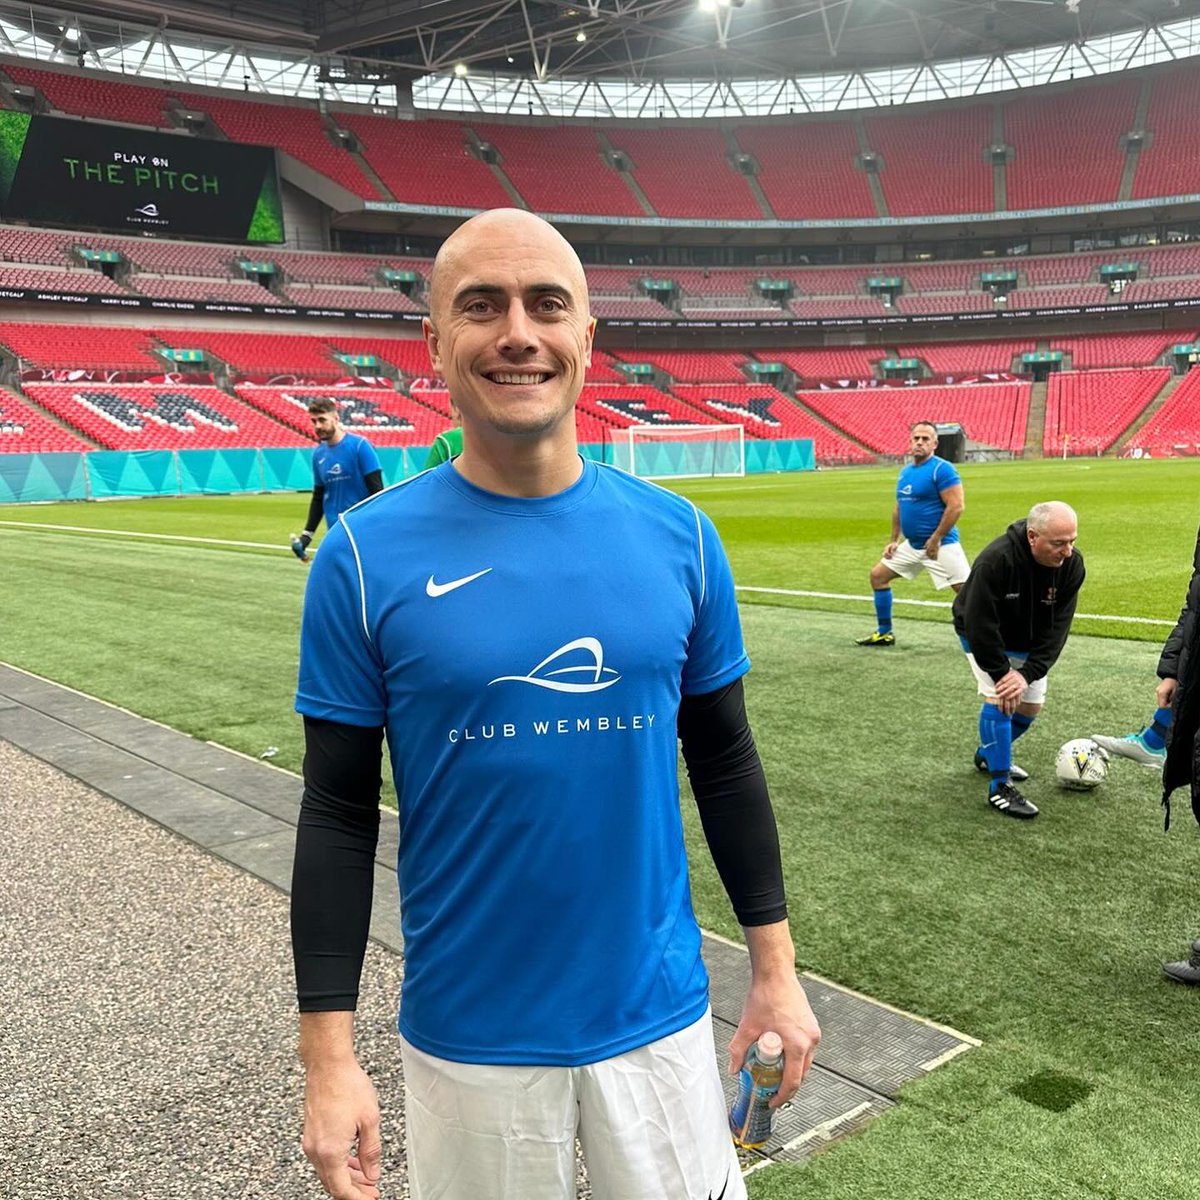 From pitch to pitch side ⚽️ Last week a few of team Mercieca had the honour of taking part in @ClubWembley's annual Play on the Pitch – an exclusive 11-a-side game on the iconic grounds of @wembleystadium available to members. An incredible once in a lifetime experience!